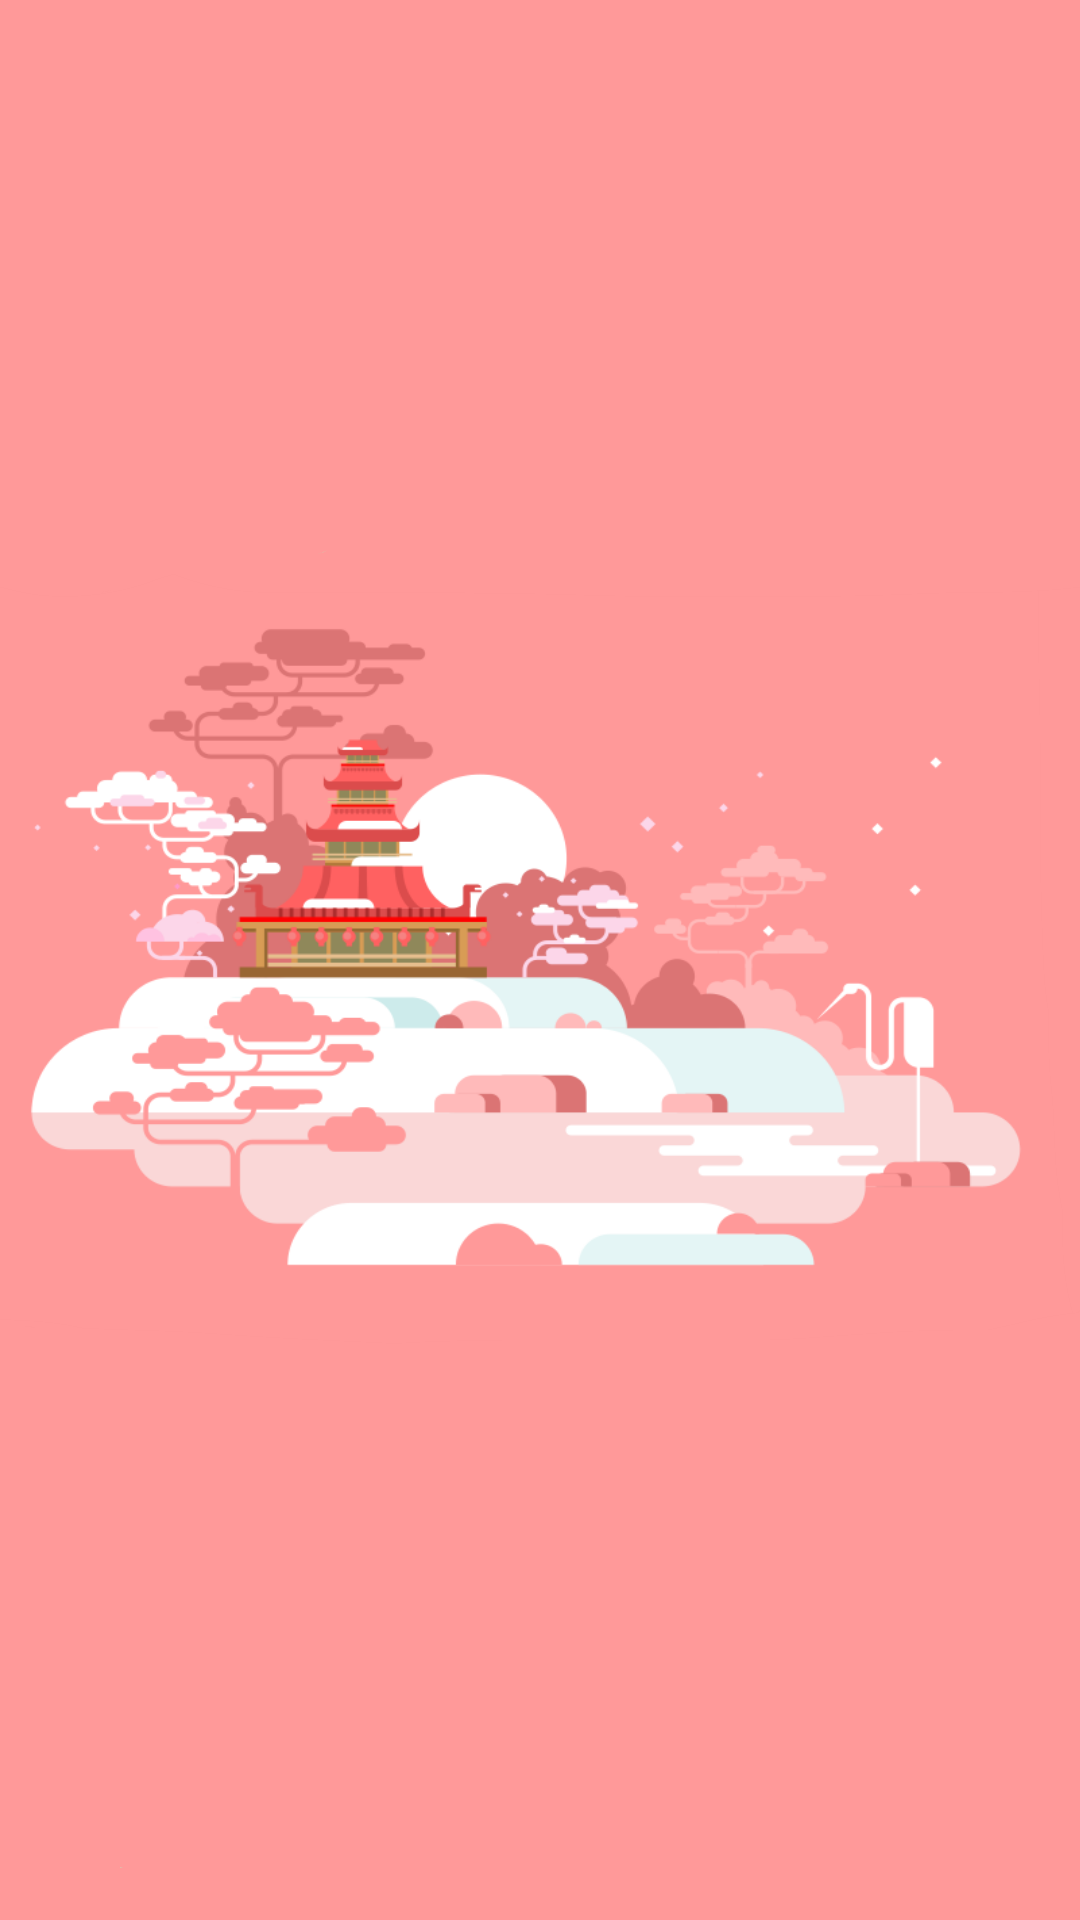 Pagoda to see more cool flat vector minimalist design art